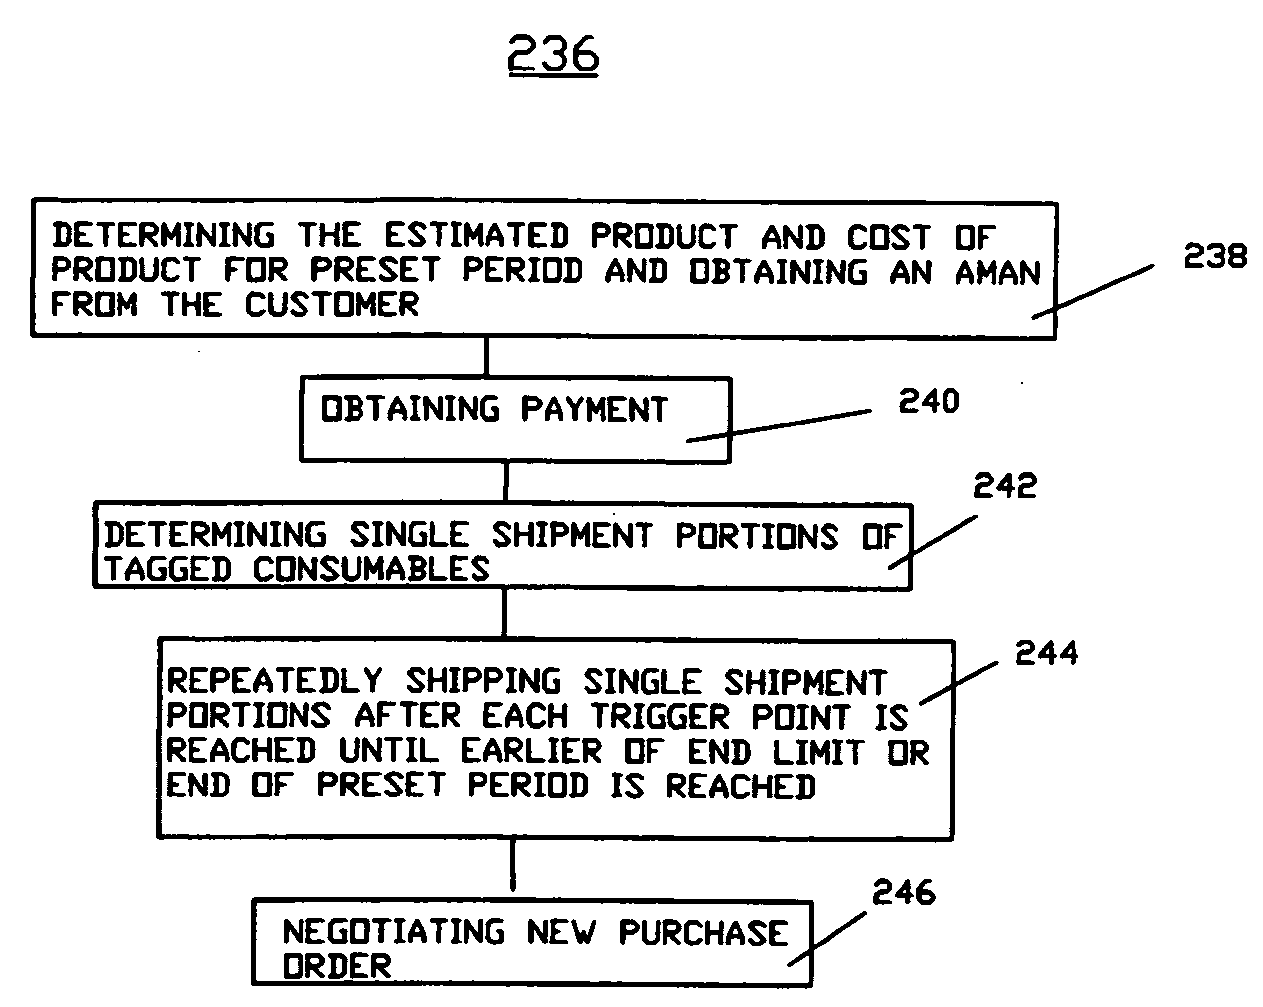 Apparatuses and methods for wireless monitoring and control of supplies for environmental sampling and chromatographic apparatuses